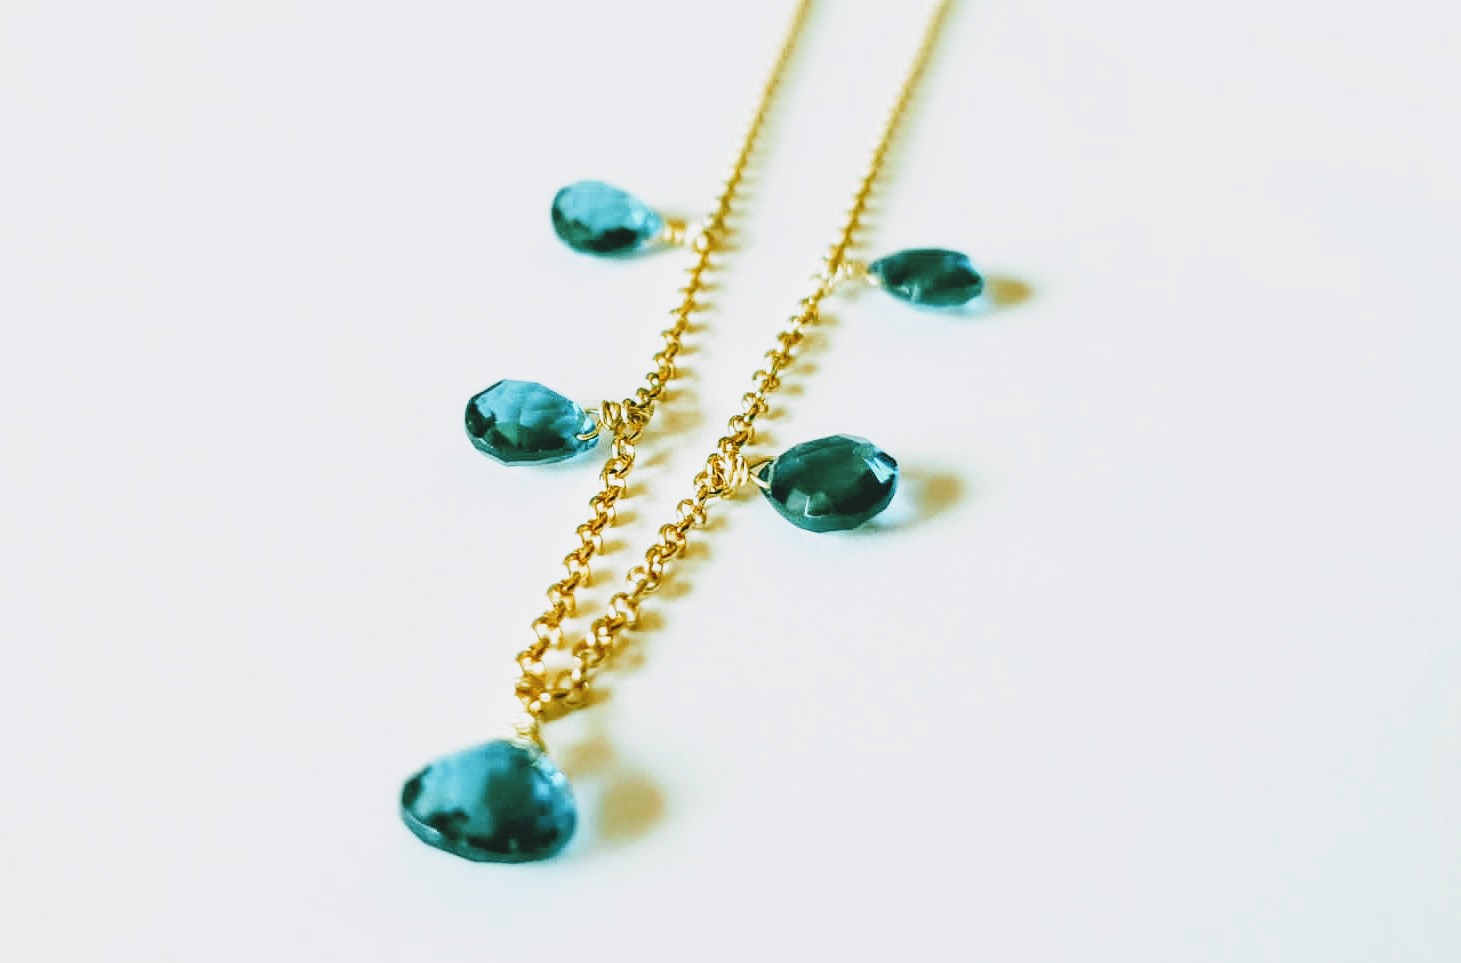 Golden silver necklace with London topaz